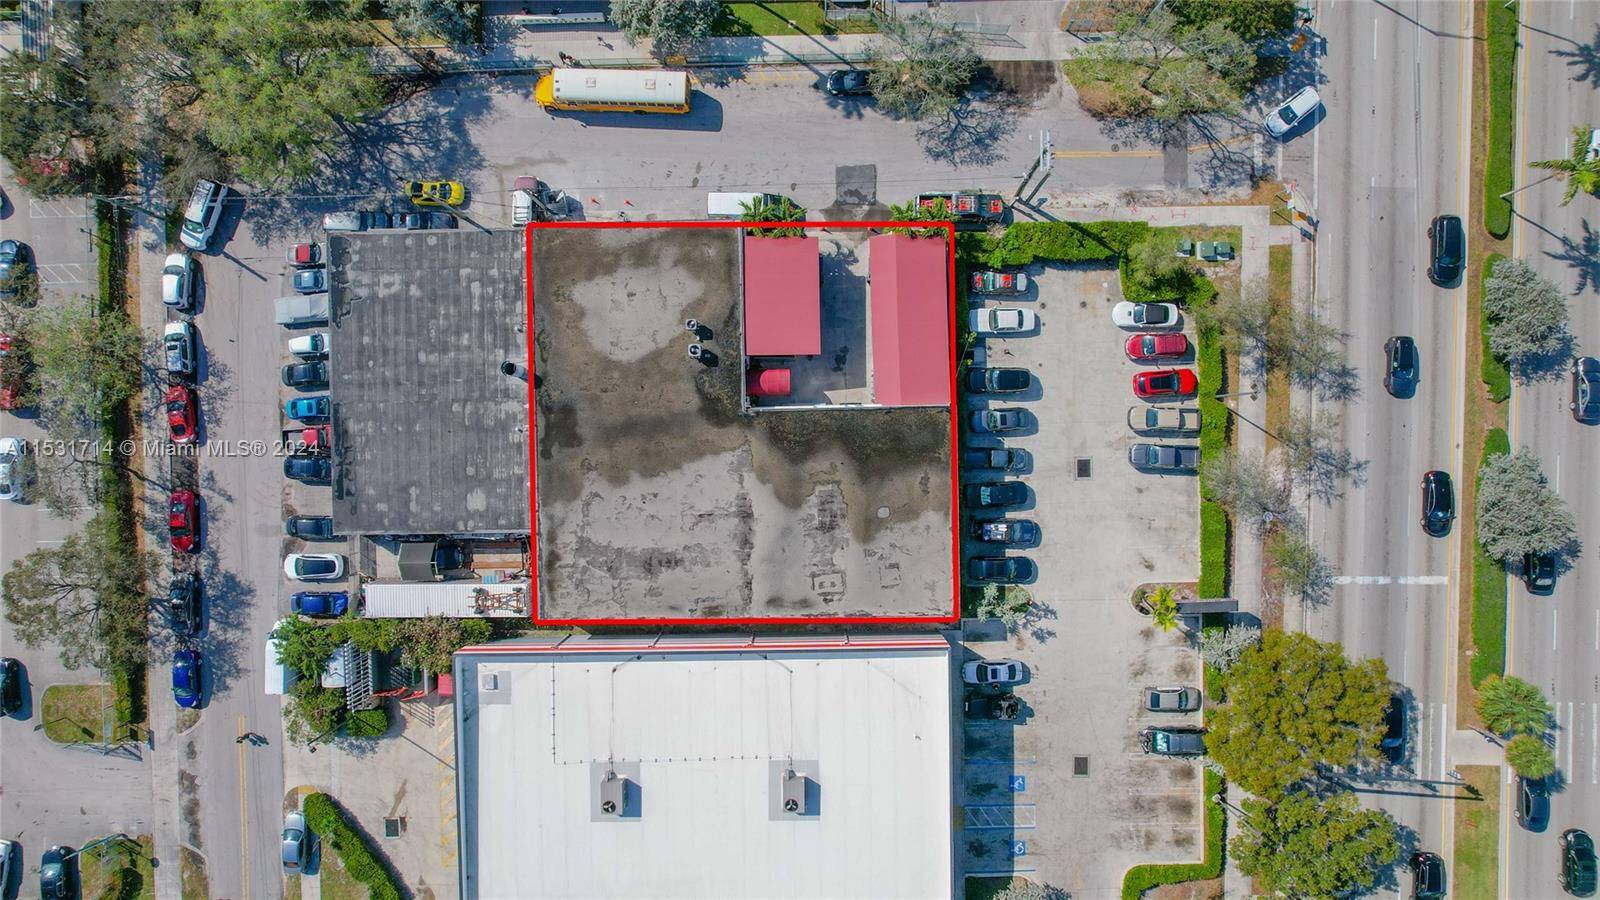 Investor Alert ! Prime space in strategic location in very busy area of Sunrise Blvd located East of 95 with very high visibility from the street.